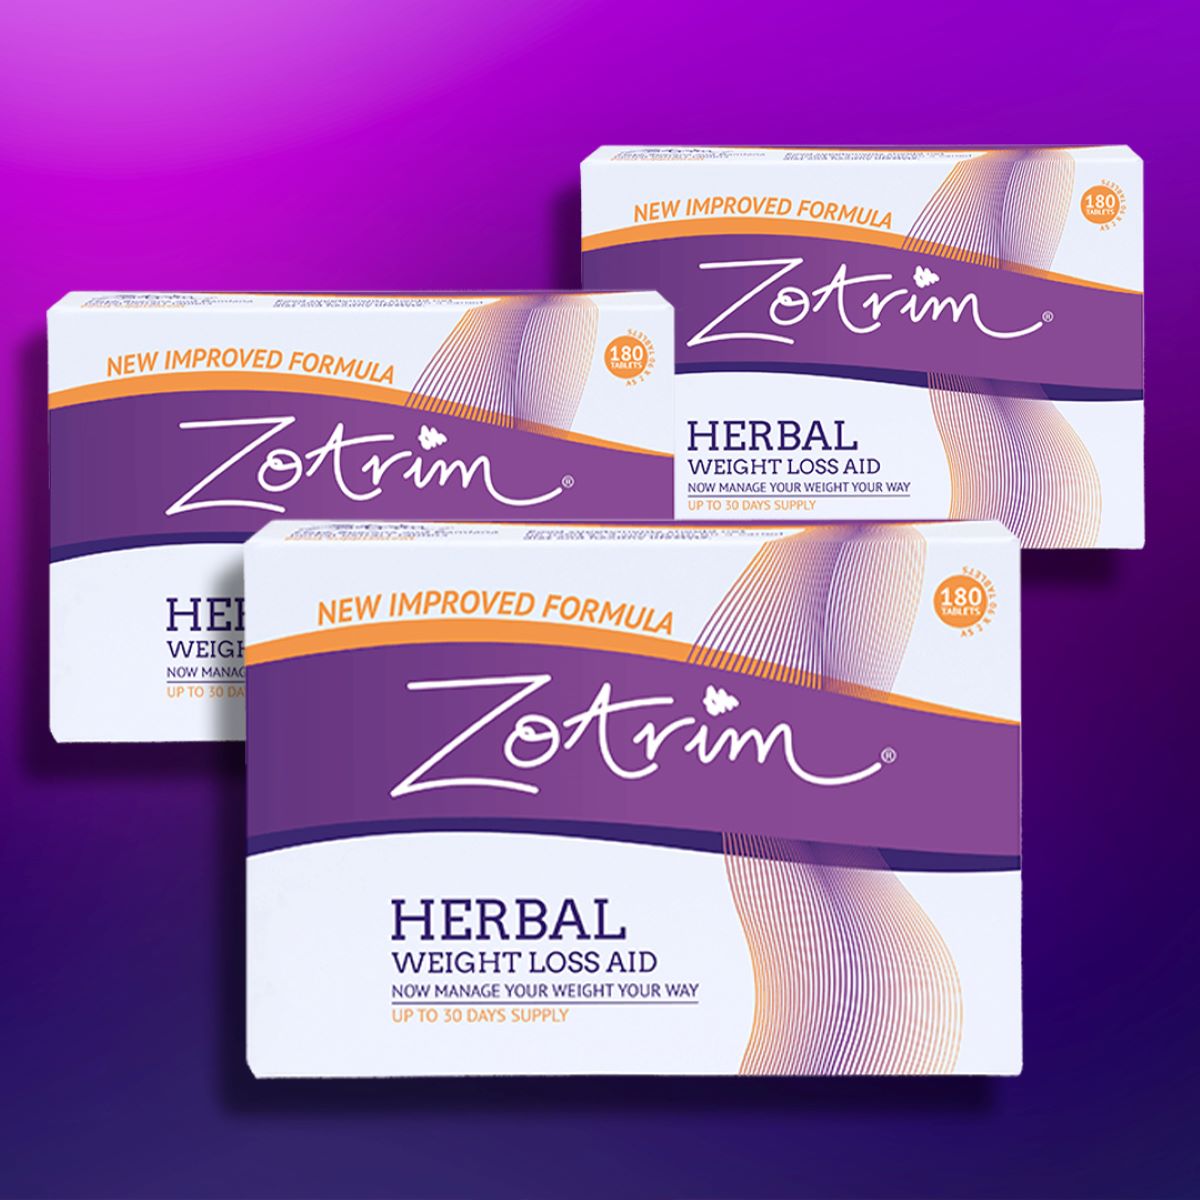 Zotrim: The Ultimate Weight Loss Supplement Revealed! Honest Reviews Inside